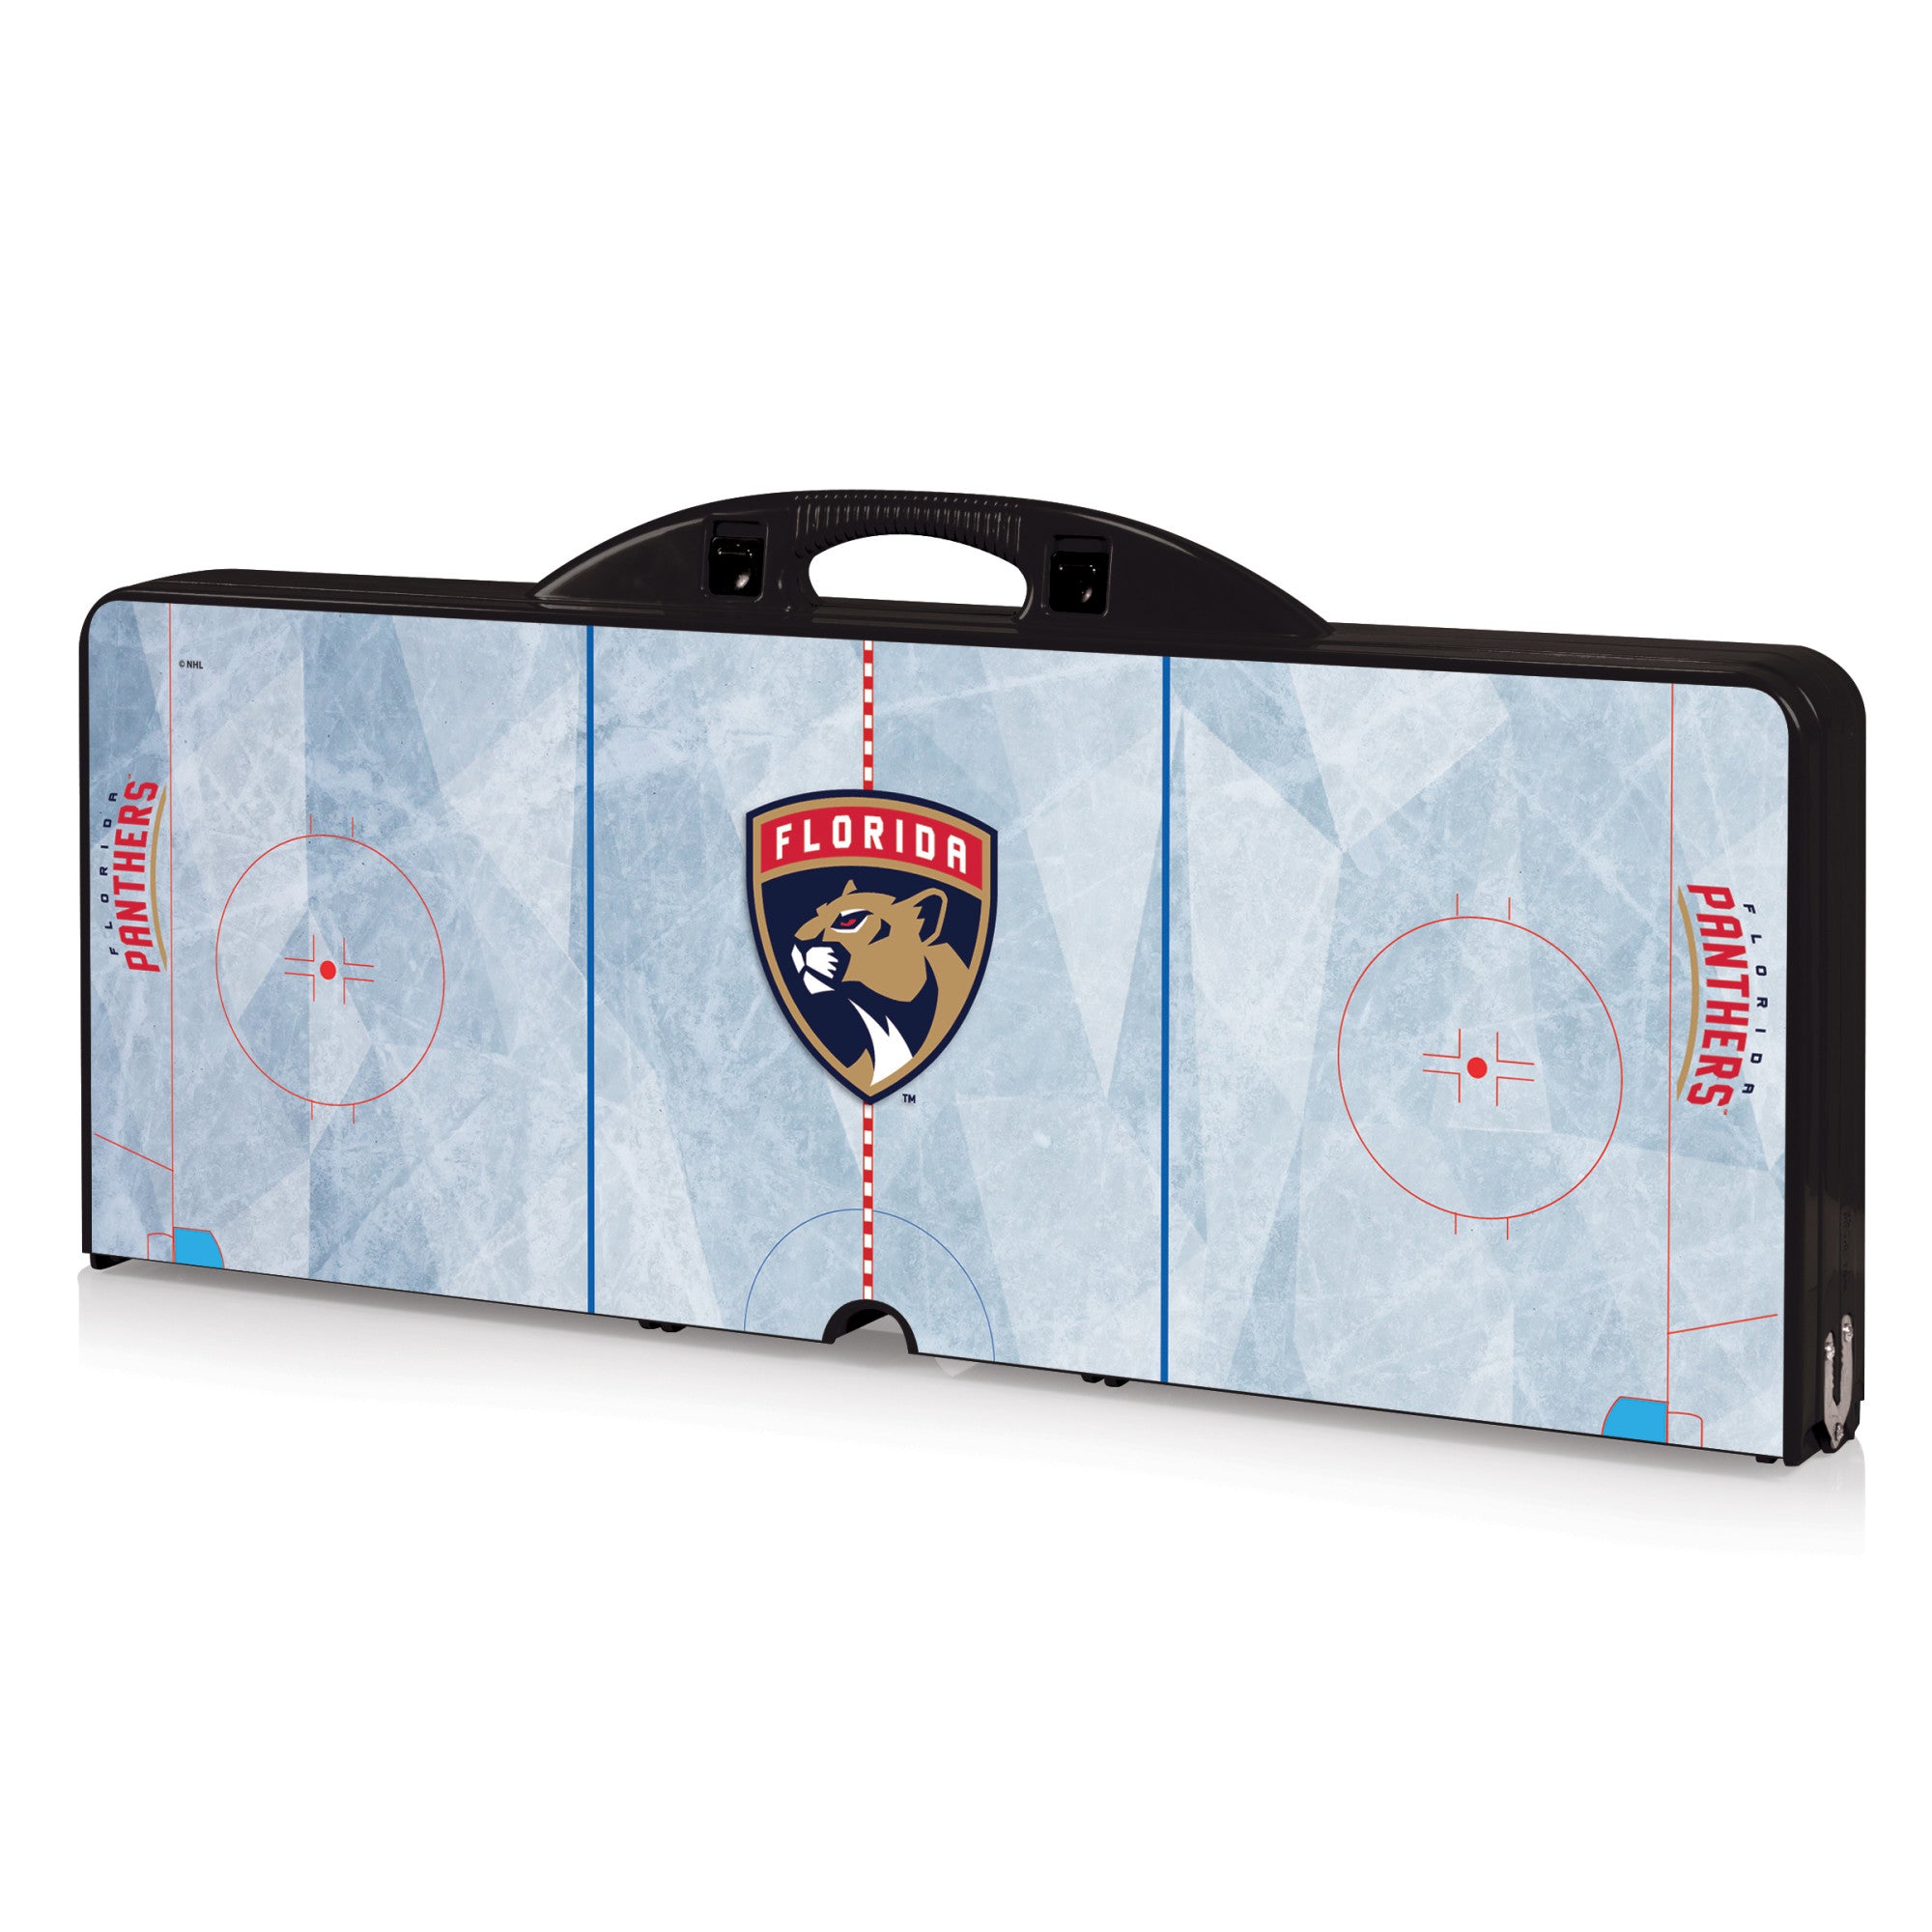 Hockey Rink - Florida Panthers - Picnic Table Portable Folding Table with Seats